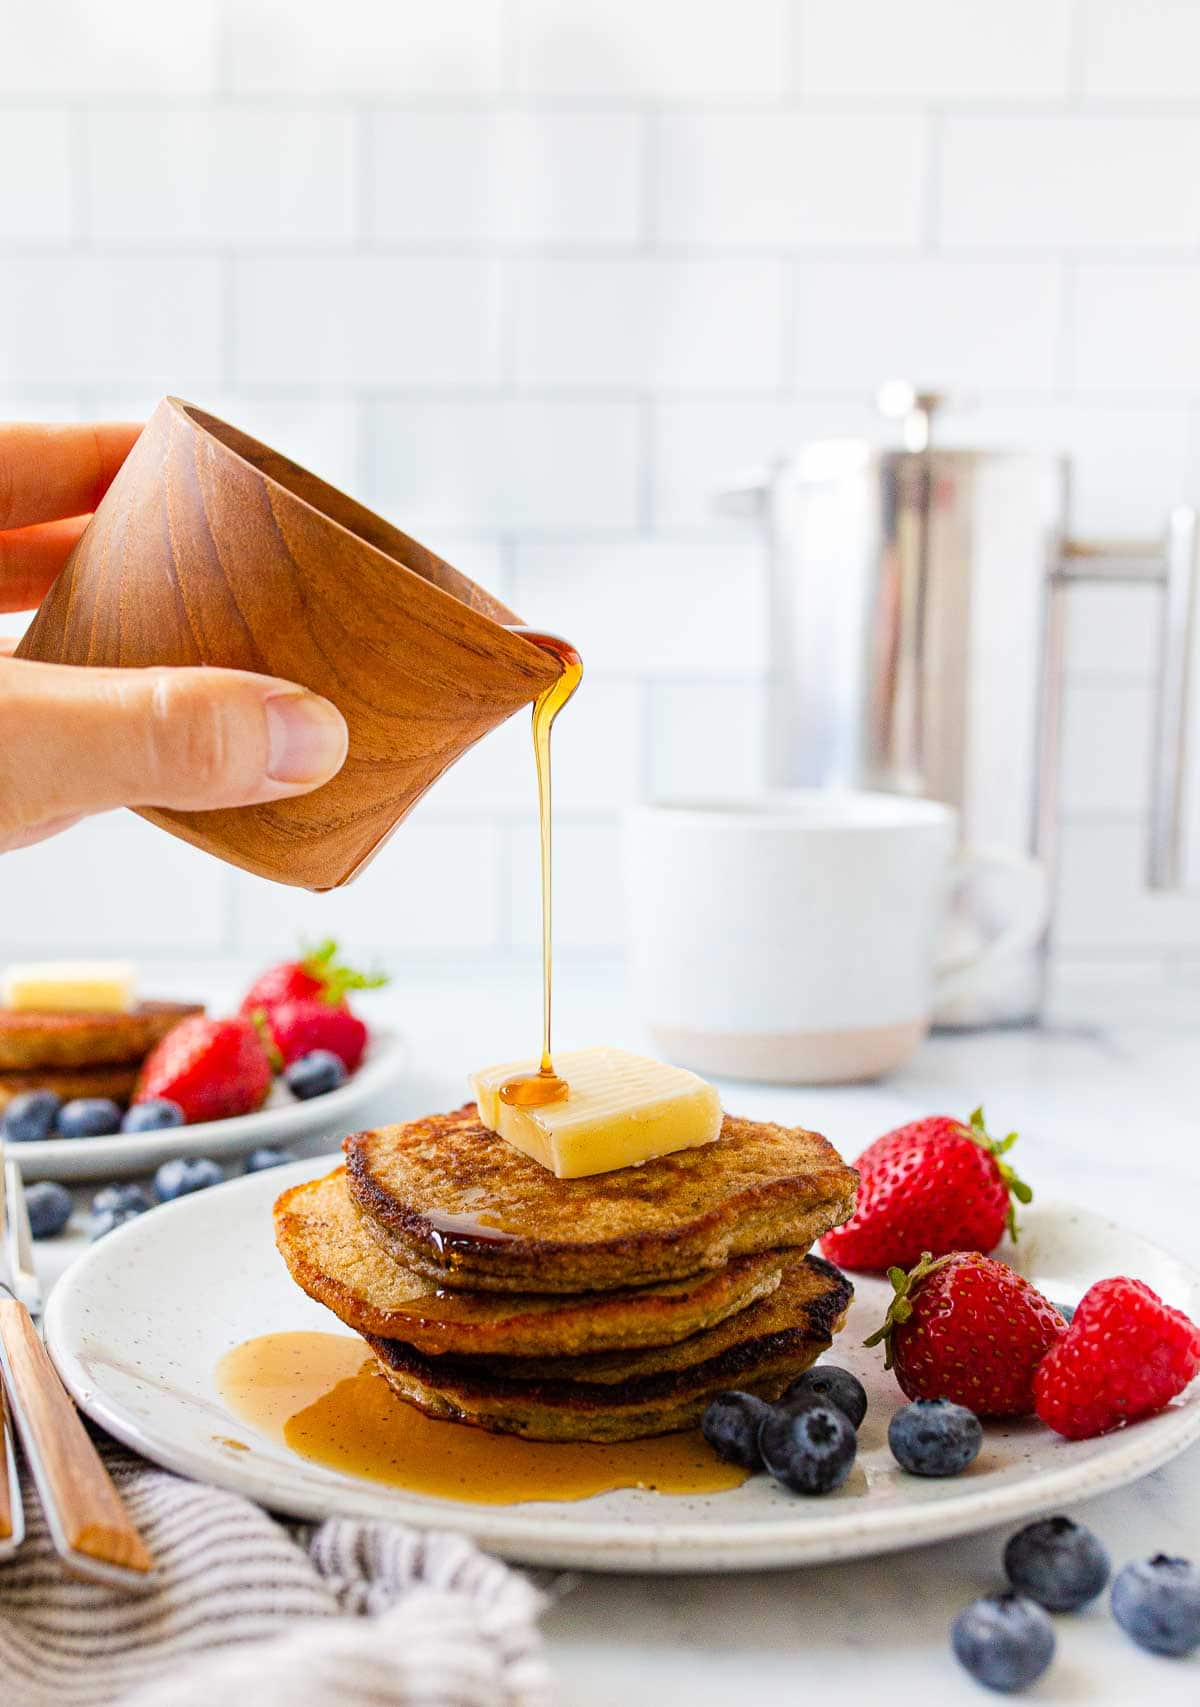 Syrup being poured on a pancake stack.